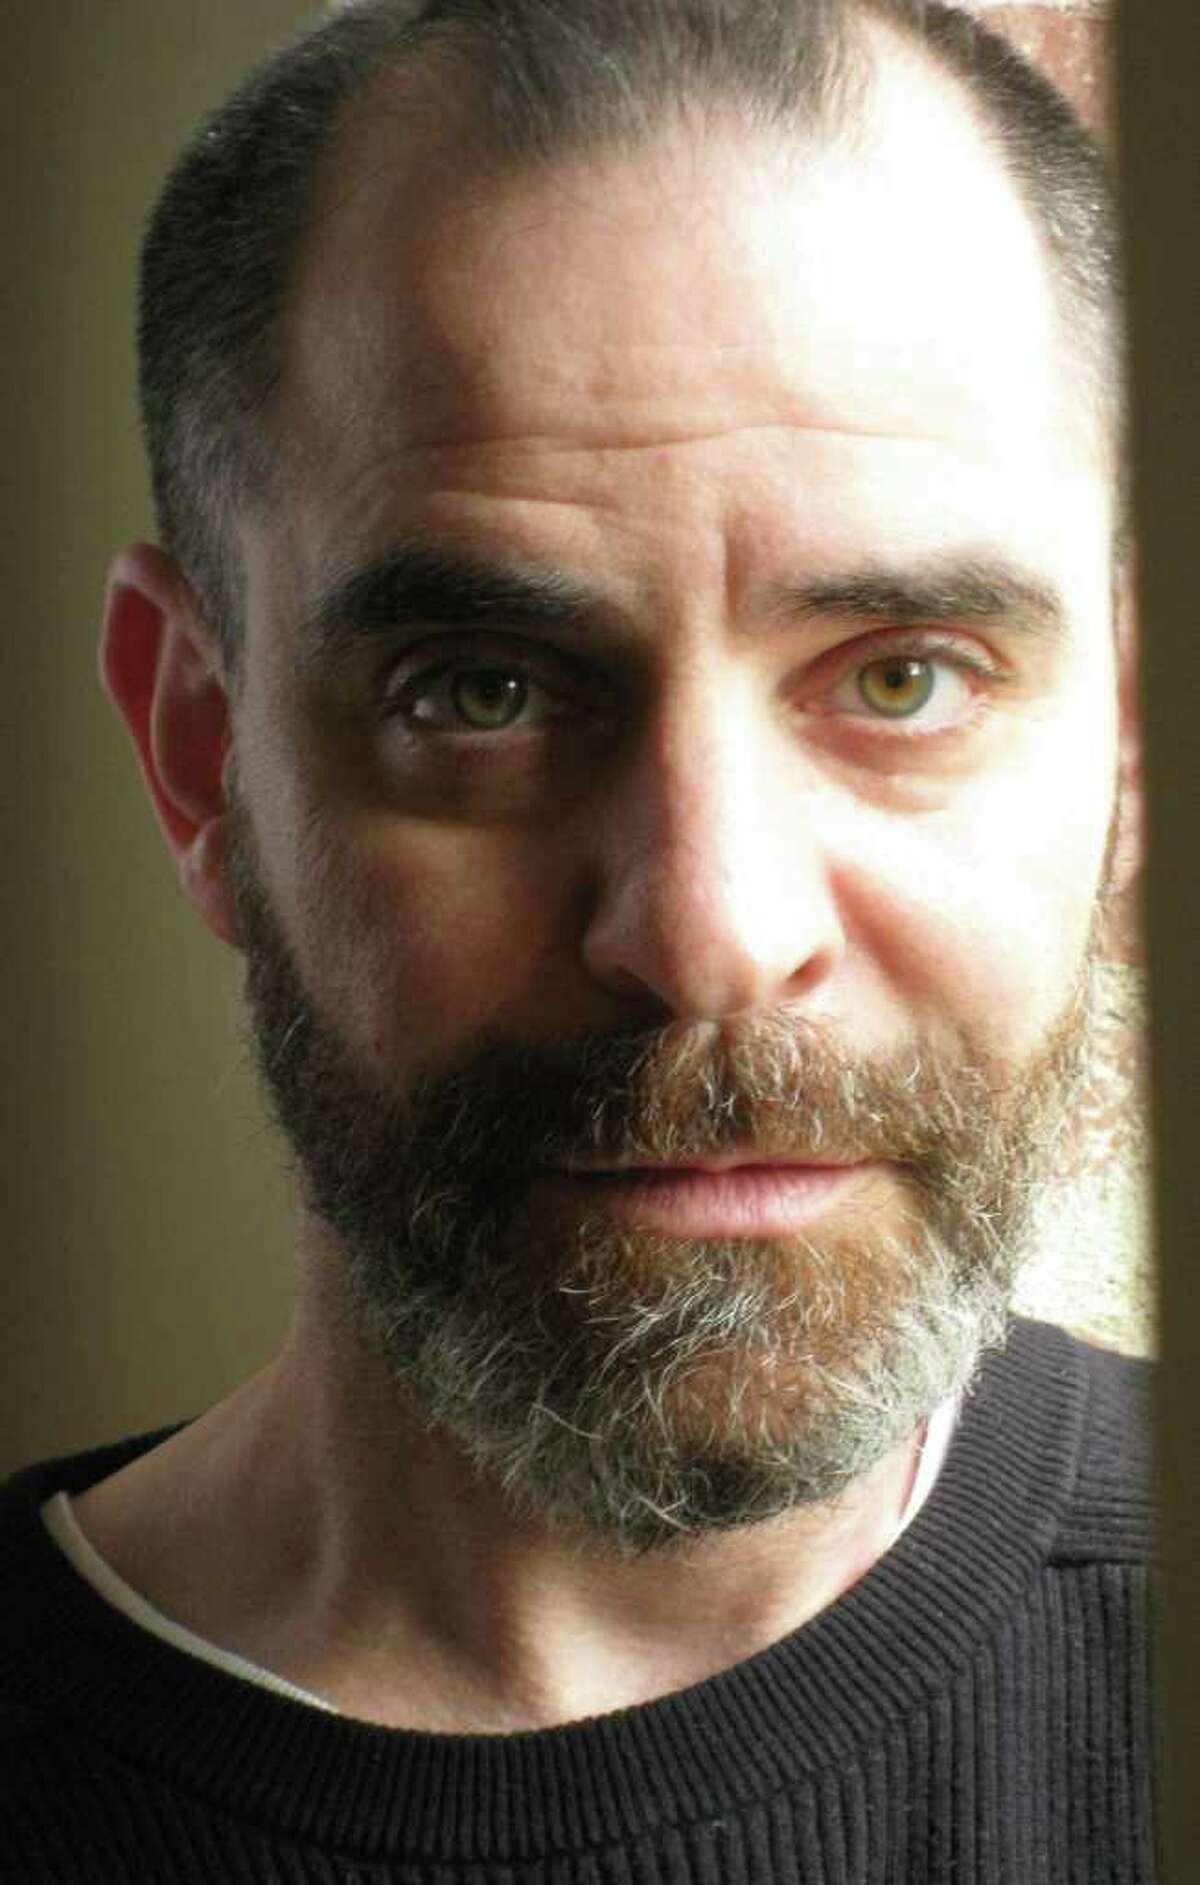 Humorist David Rakoff - of the NPR series "This American Life" - will take part in the "Selected Shorts" program at Long Wharf Theatre on March 18 during which stories will be read by Rakoff and longtime "Sesame Street" cast member Sonia Manzano.